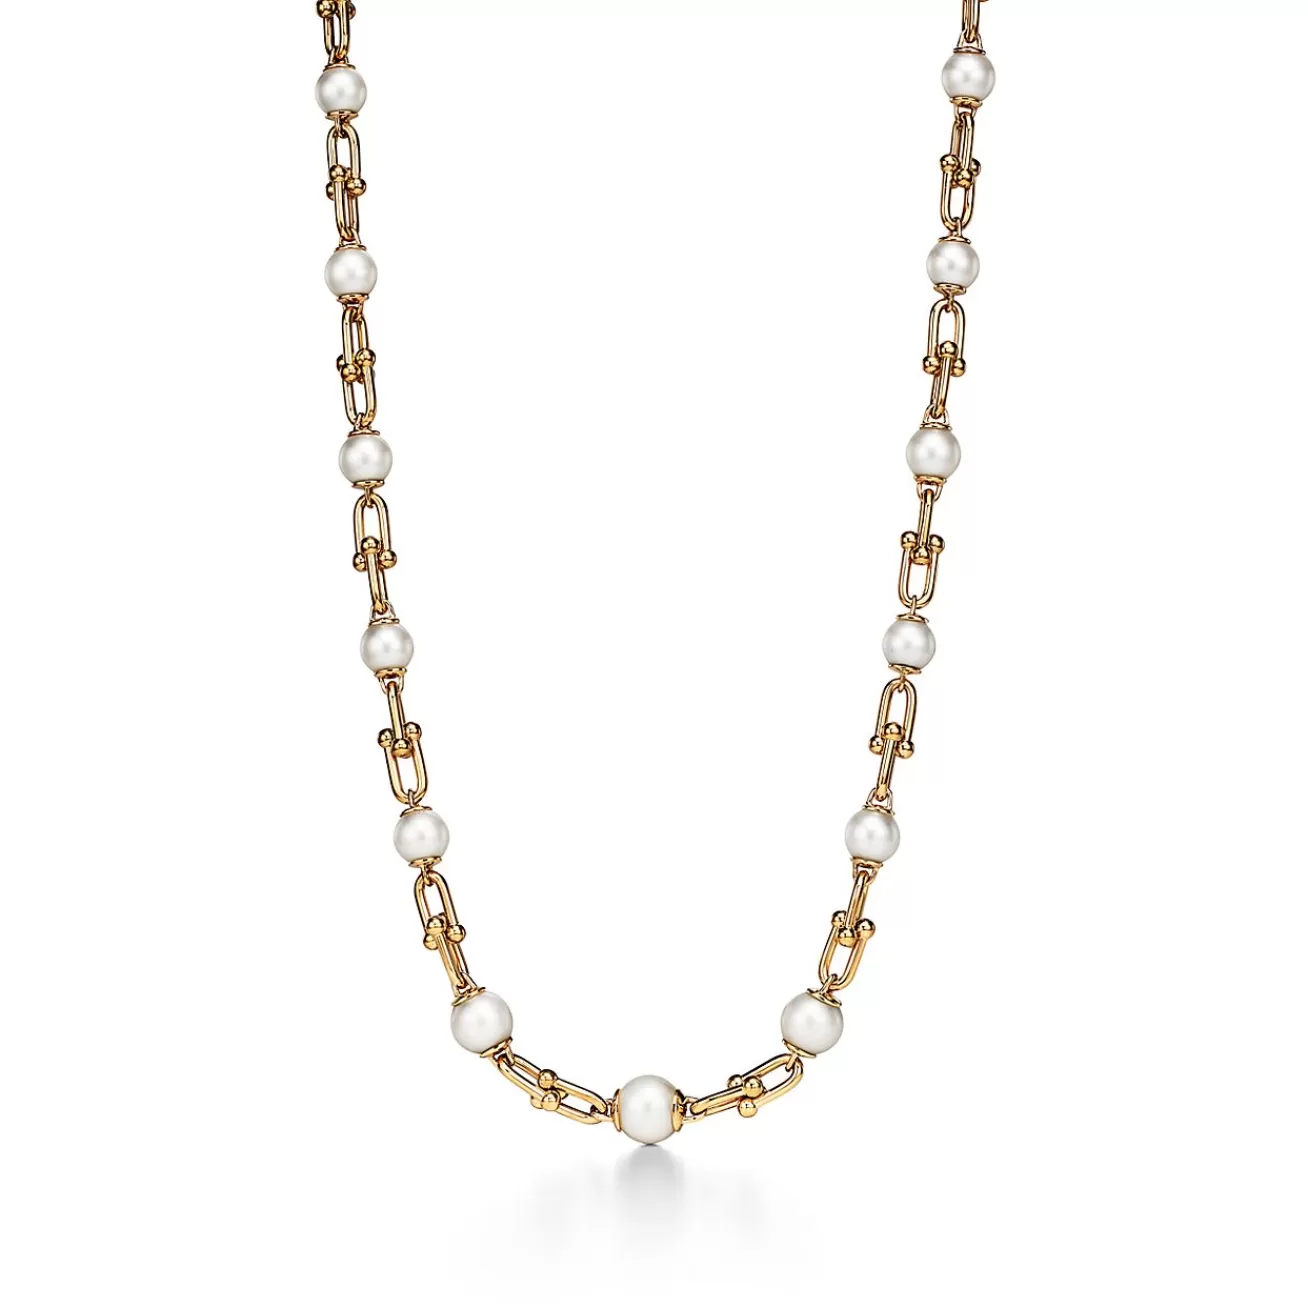 Tiffany & Co. Tiffany HardWear Graduated Link Necklace in Yellow Gold with Freshwater Pearls | ^ Necklaces & Pendants | New Jewelry